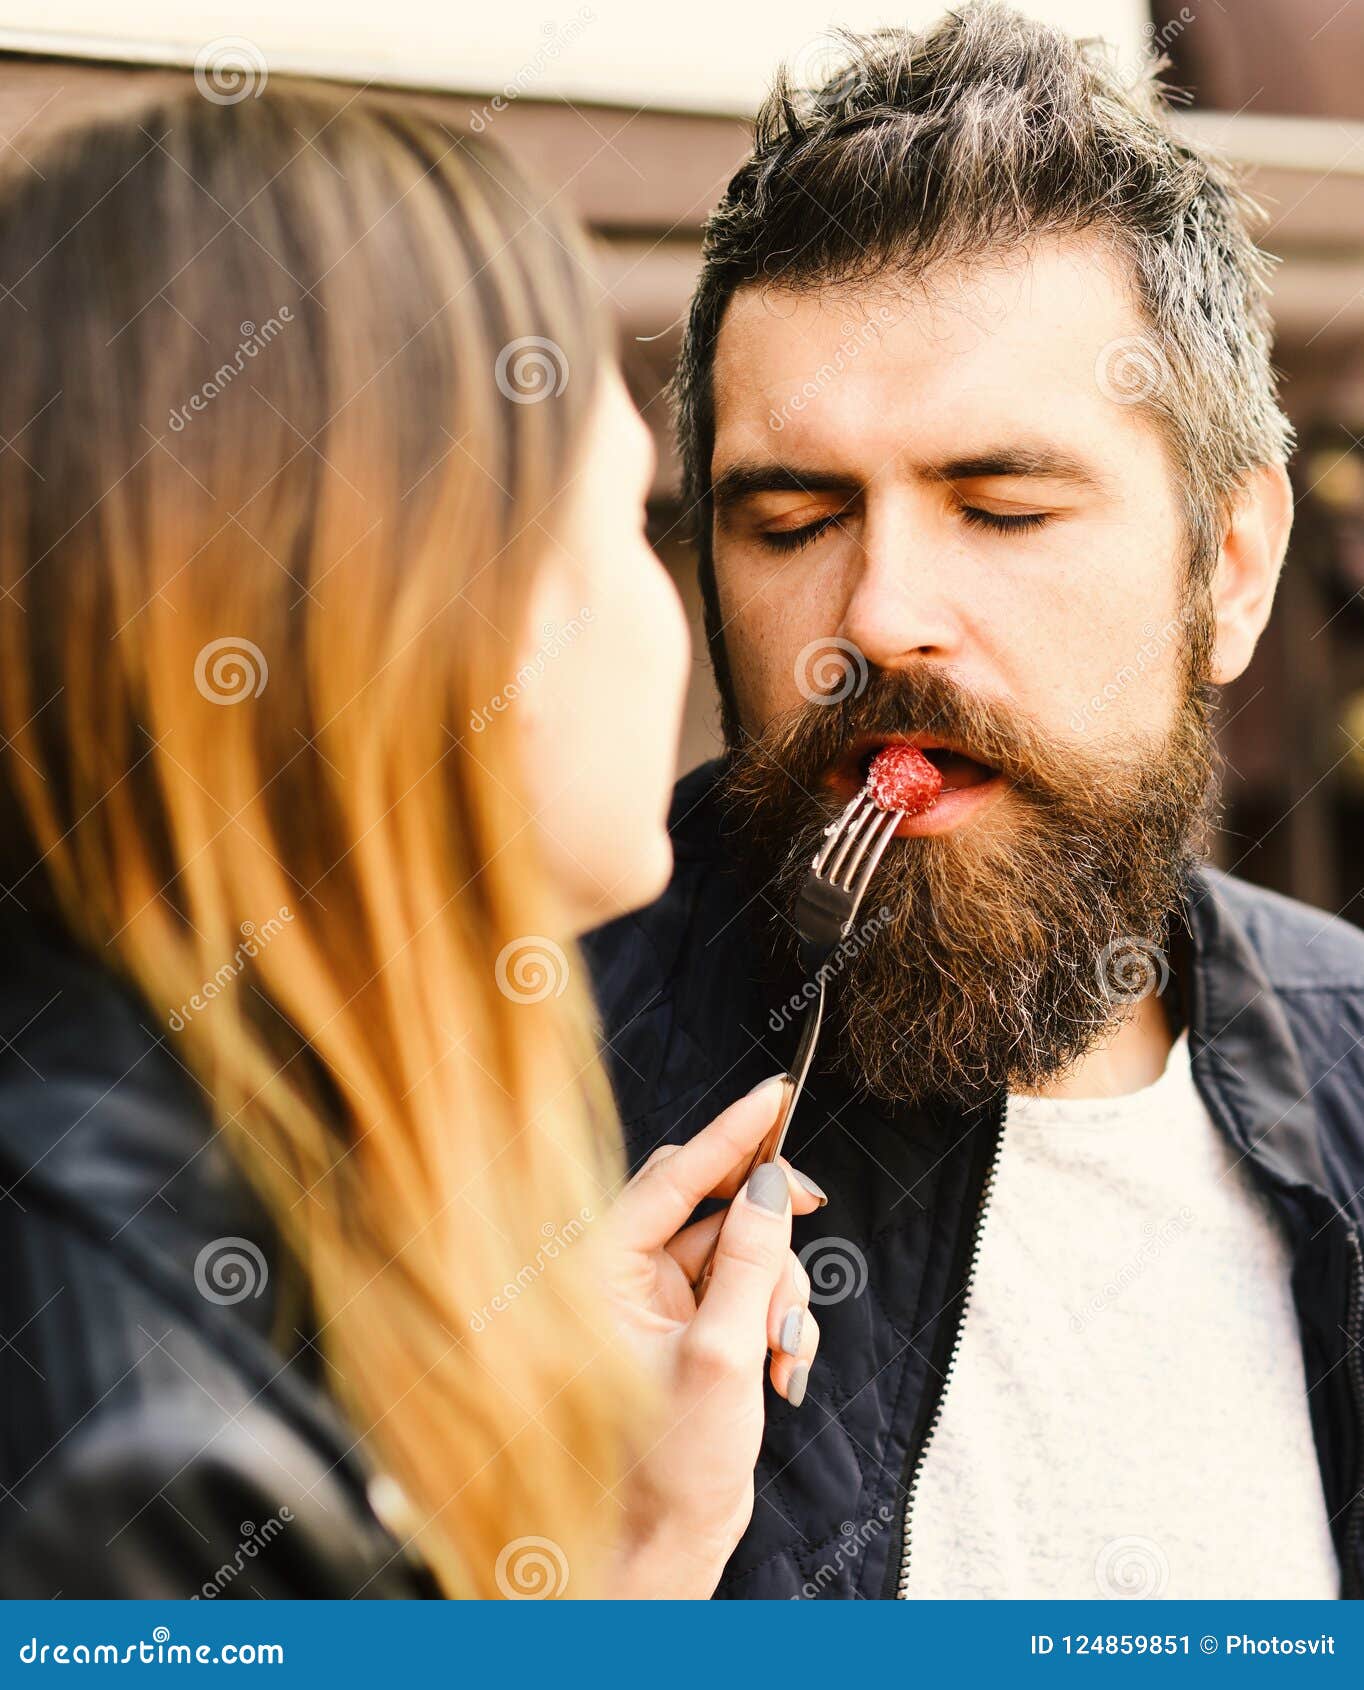 dating sites for guys with beards